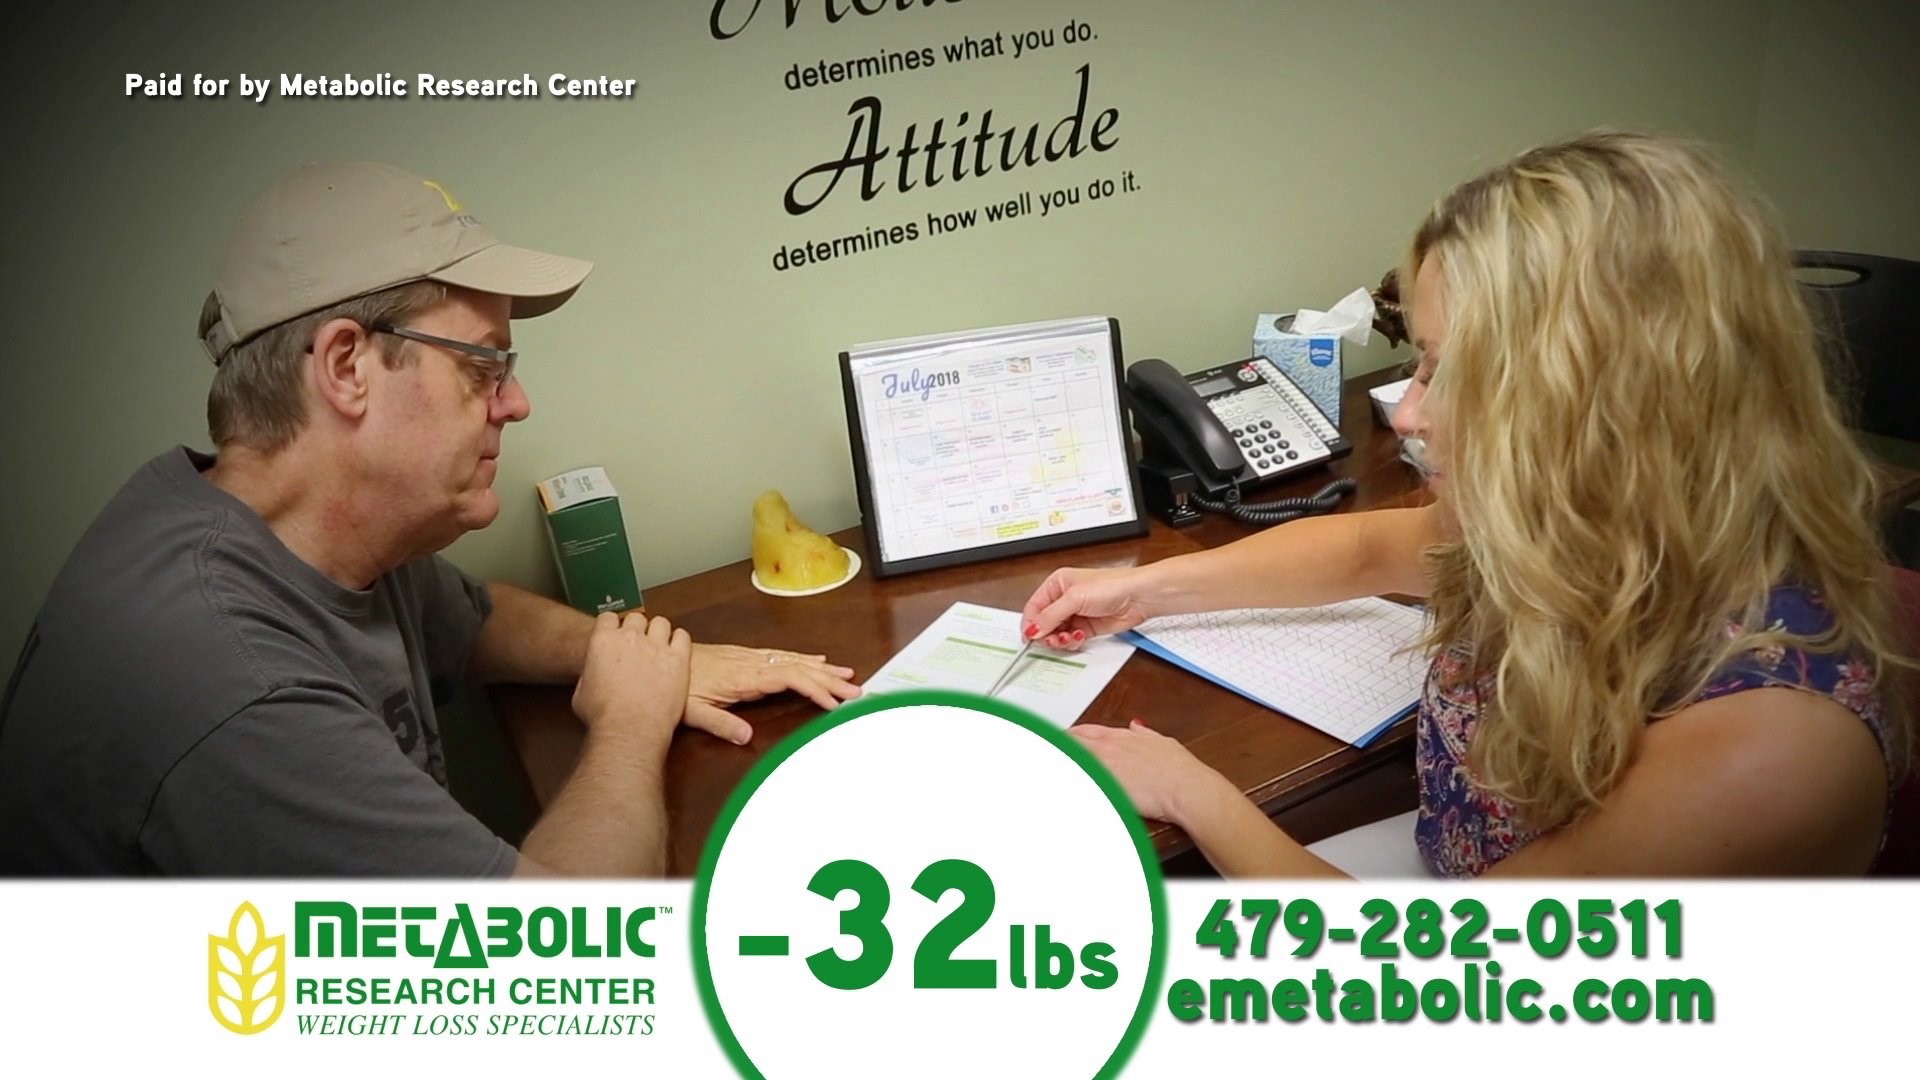 MetabolicResearchCenter726